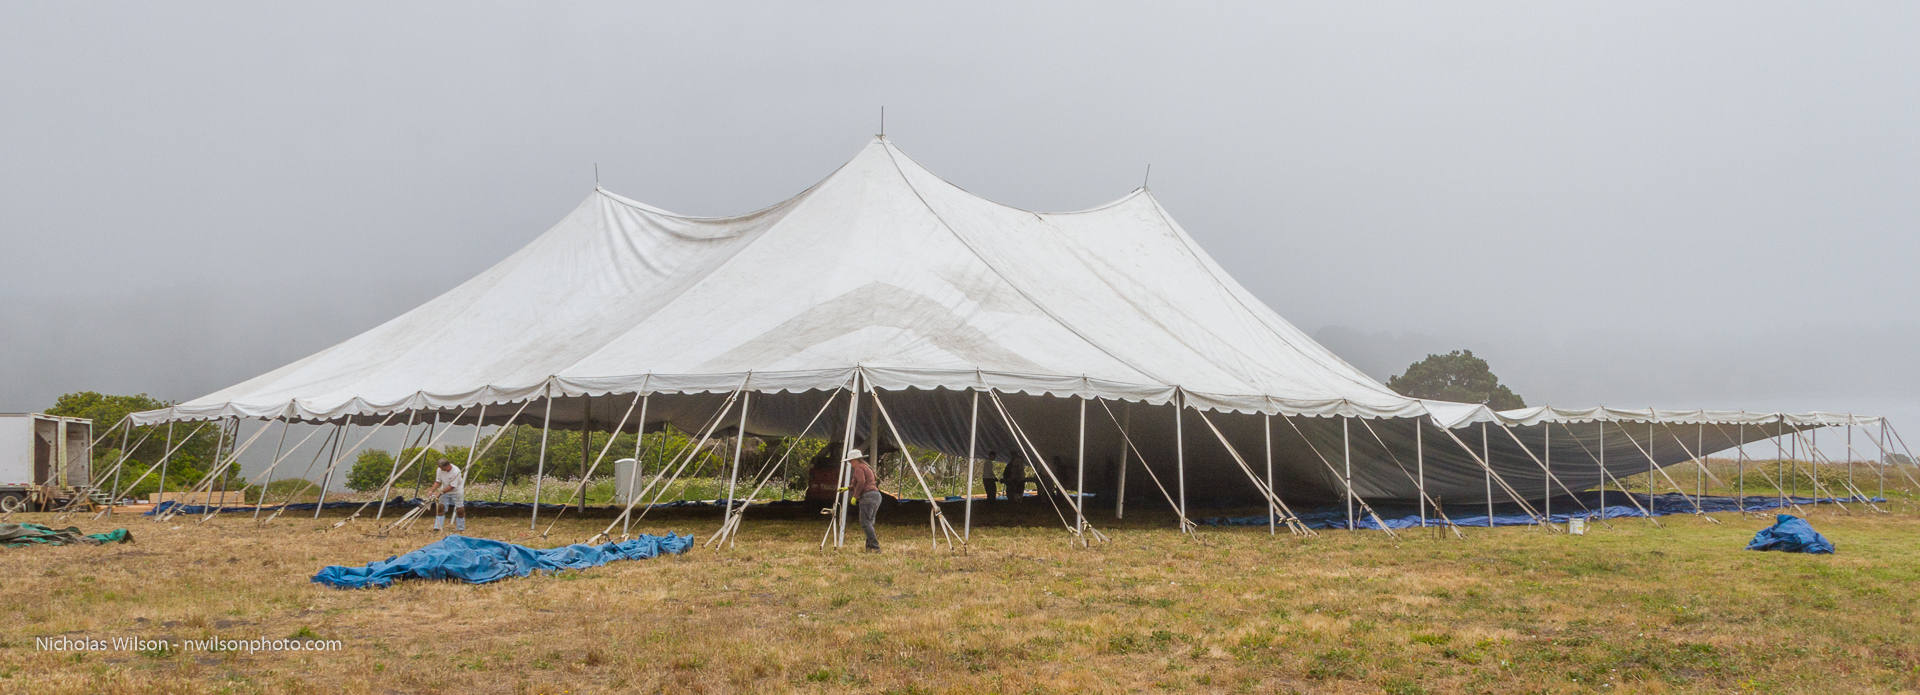 The tent was raised on June 26. It was only half up in this shot.